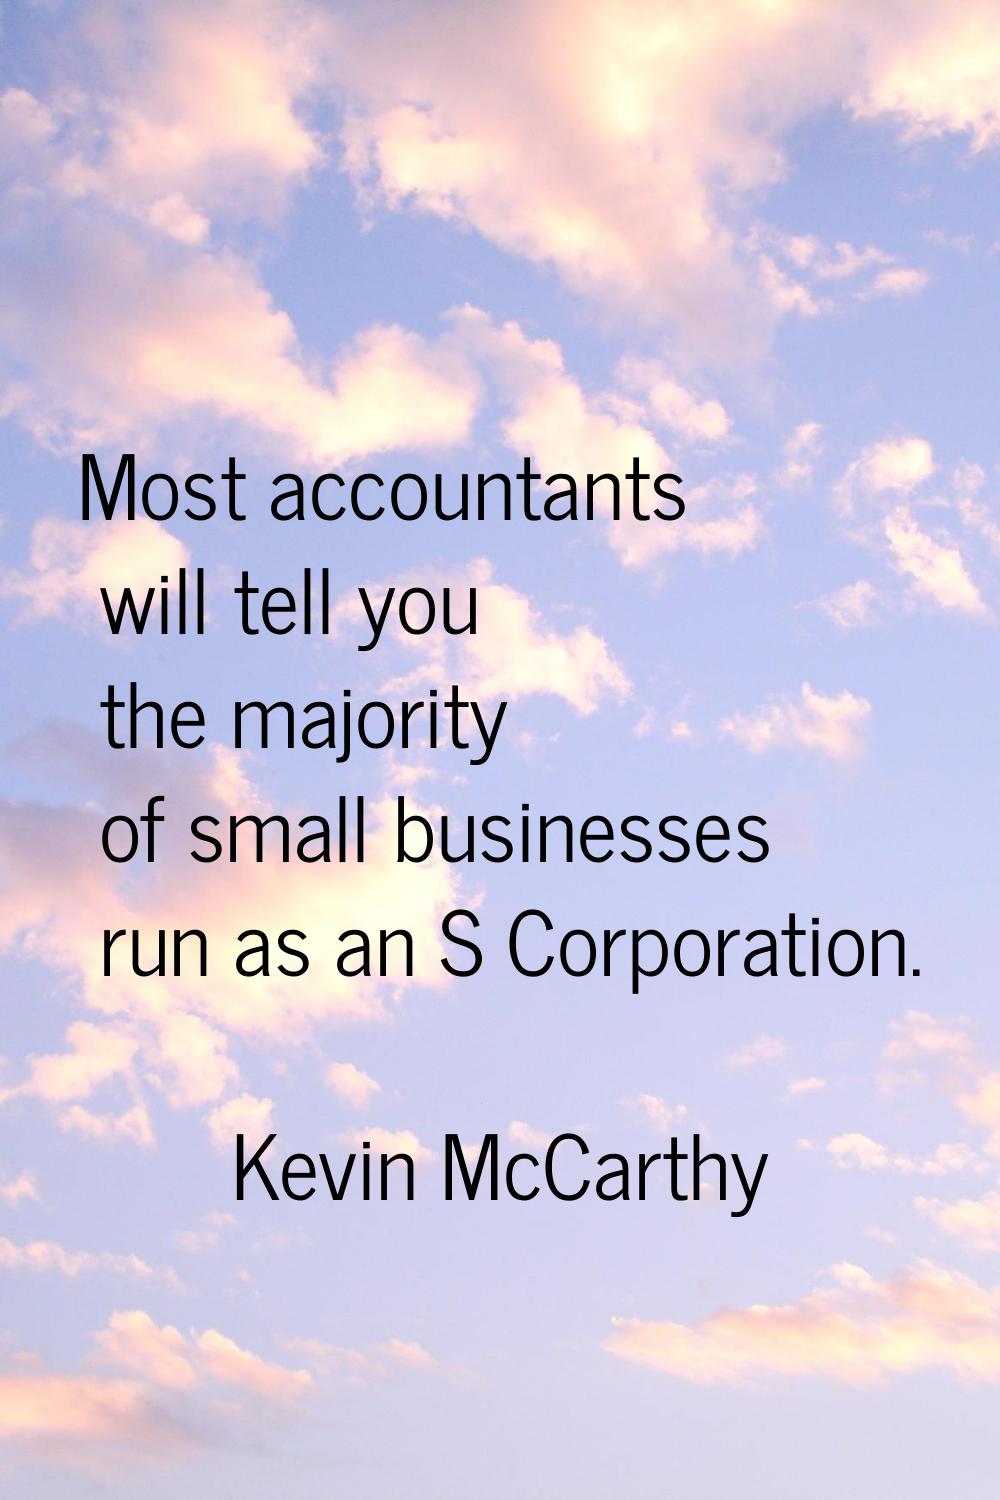 Most accountants will tell you the majority of small businesses run as an S Corporation.